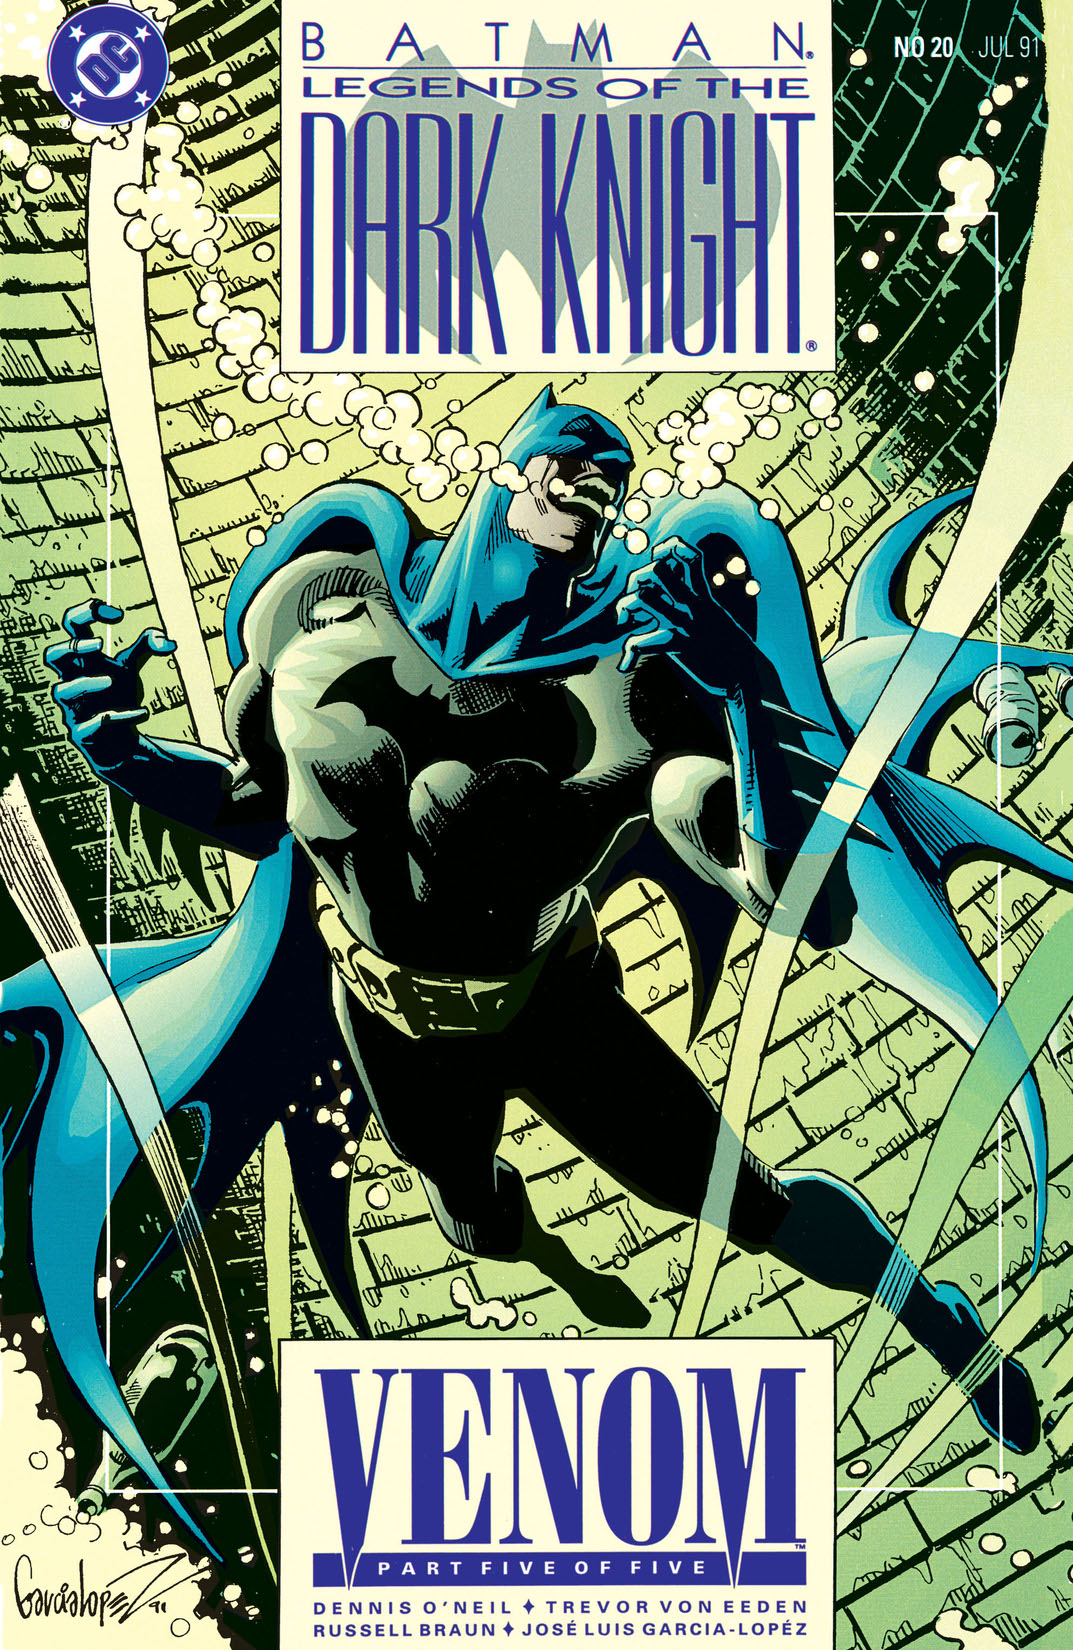 Batman: Legends of the Dark Knight #20 preview images